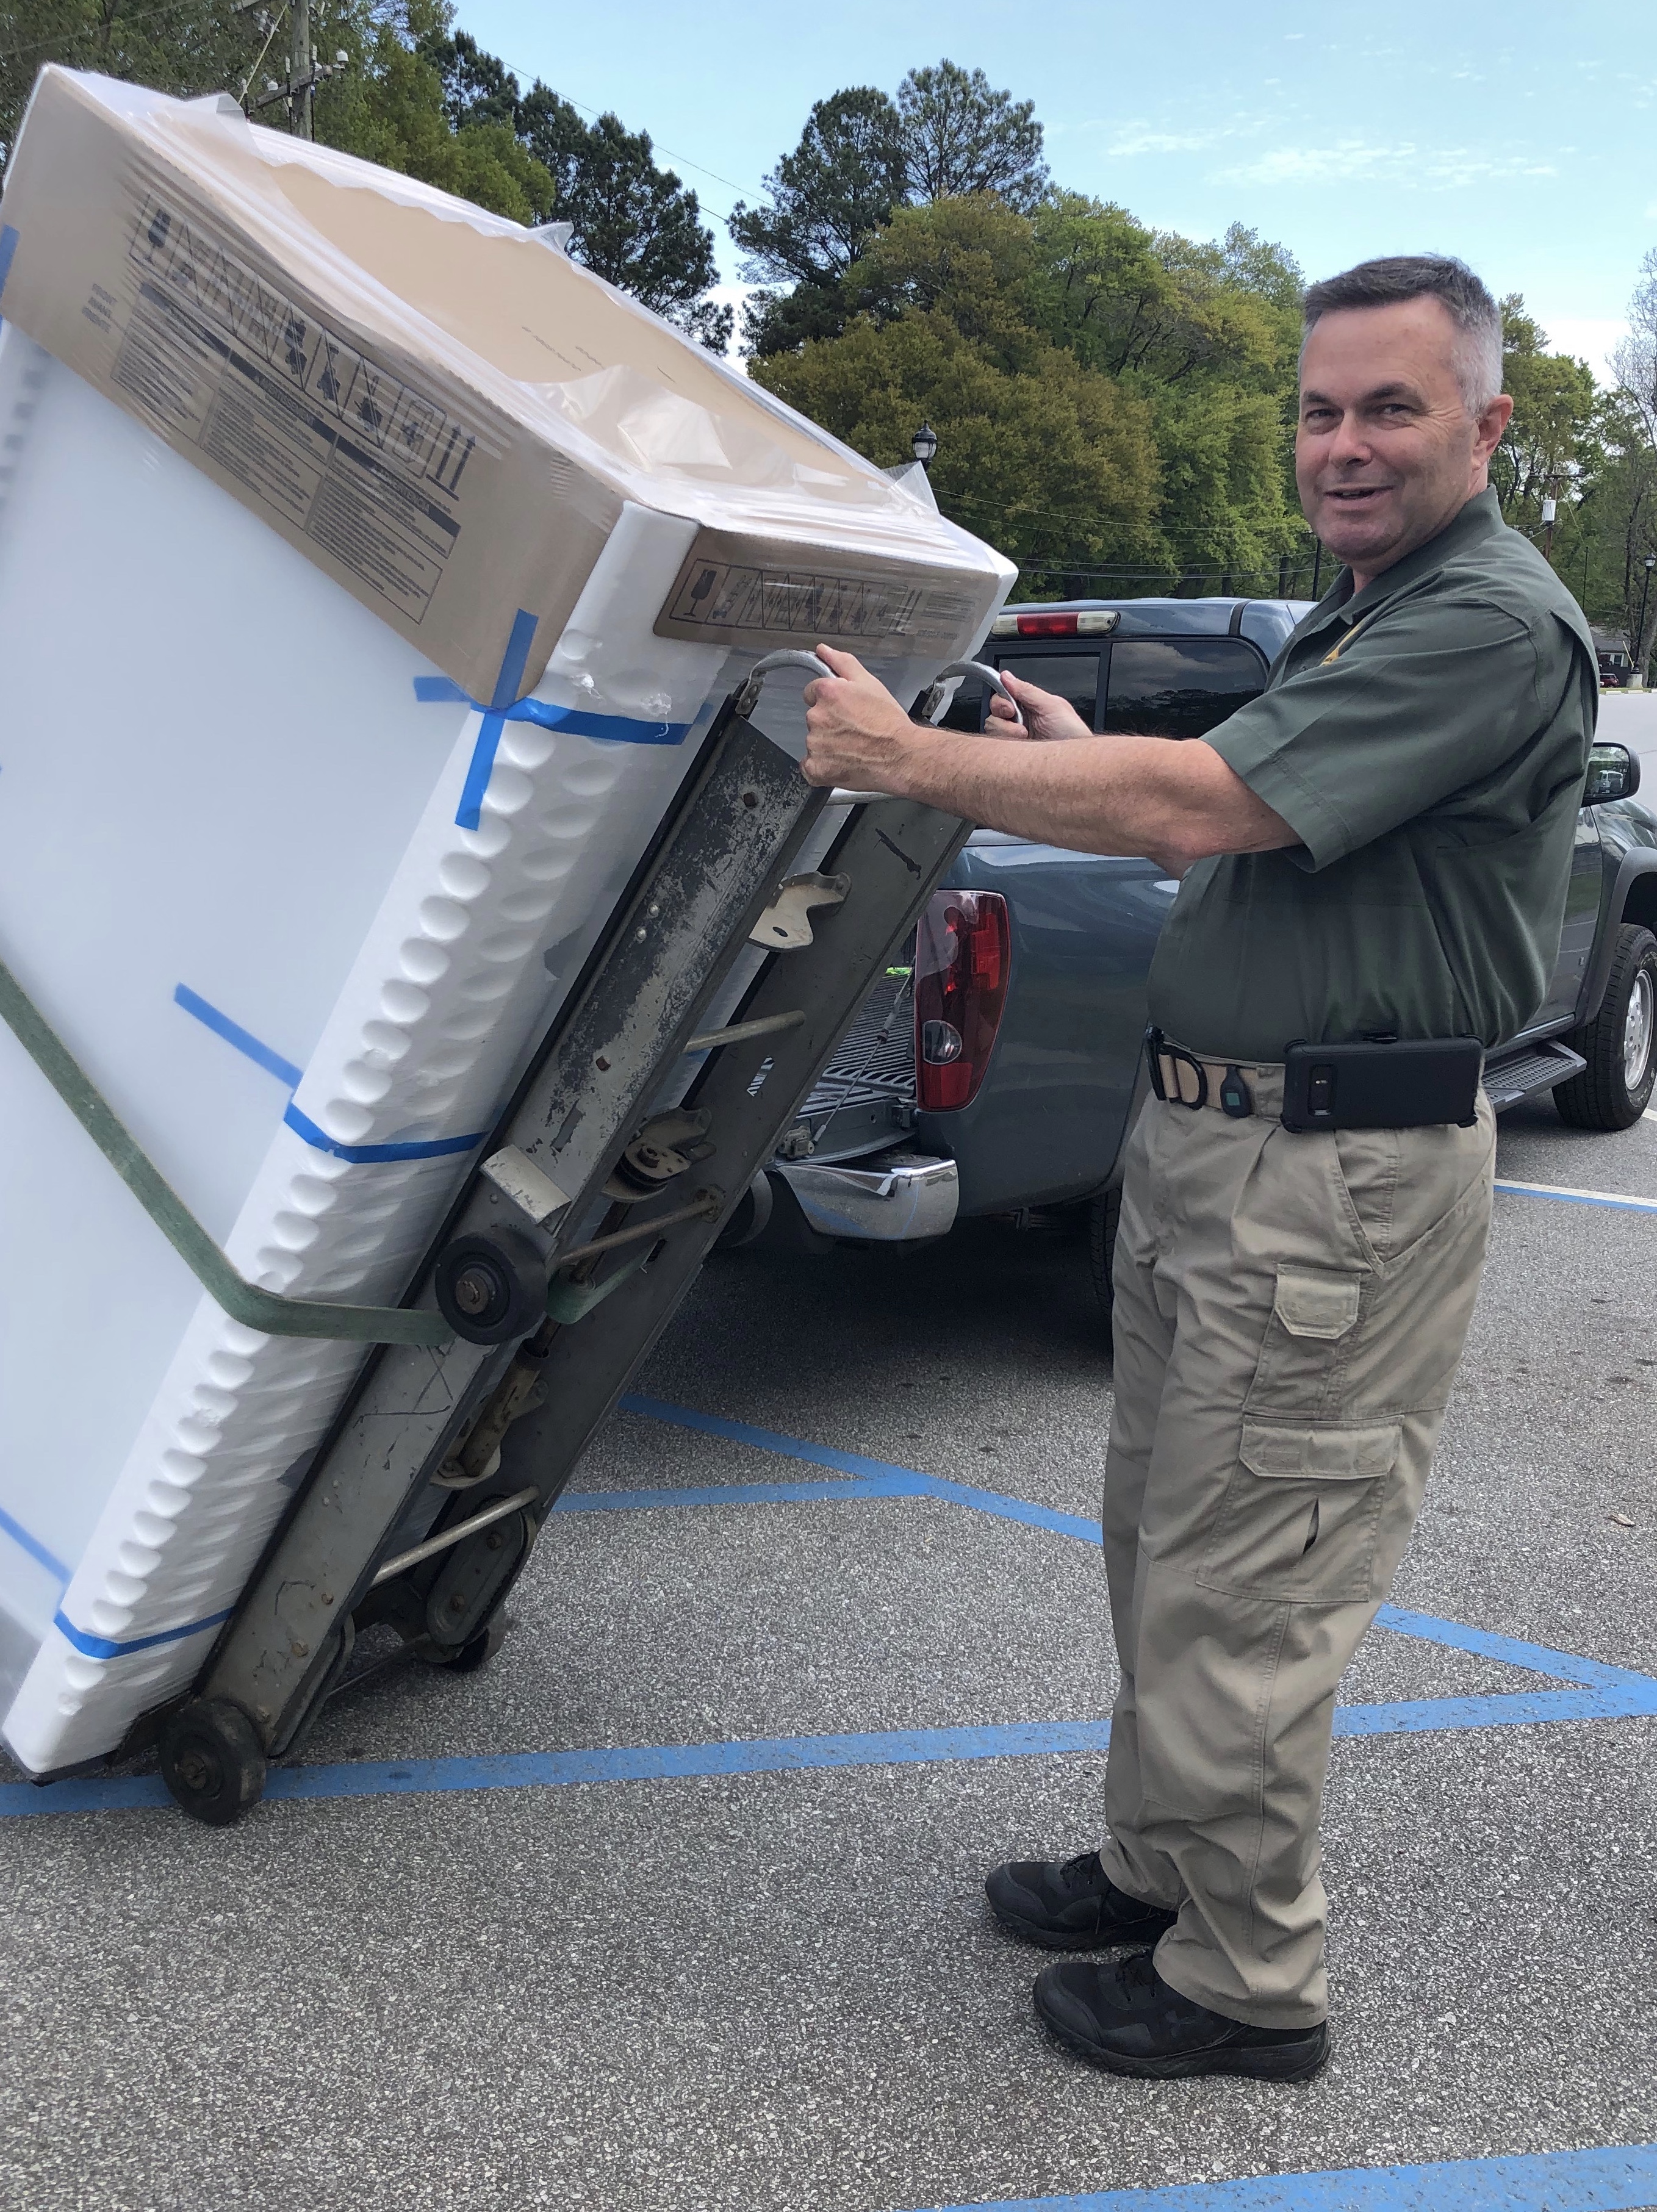 "Sheriff Rick Clark holds a newly purchased freezer on a moving dolly"